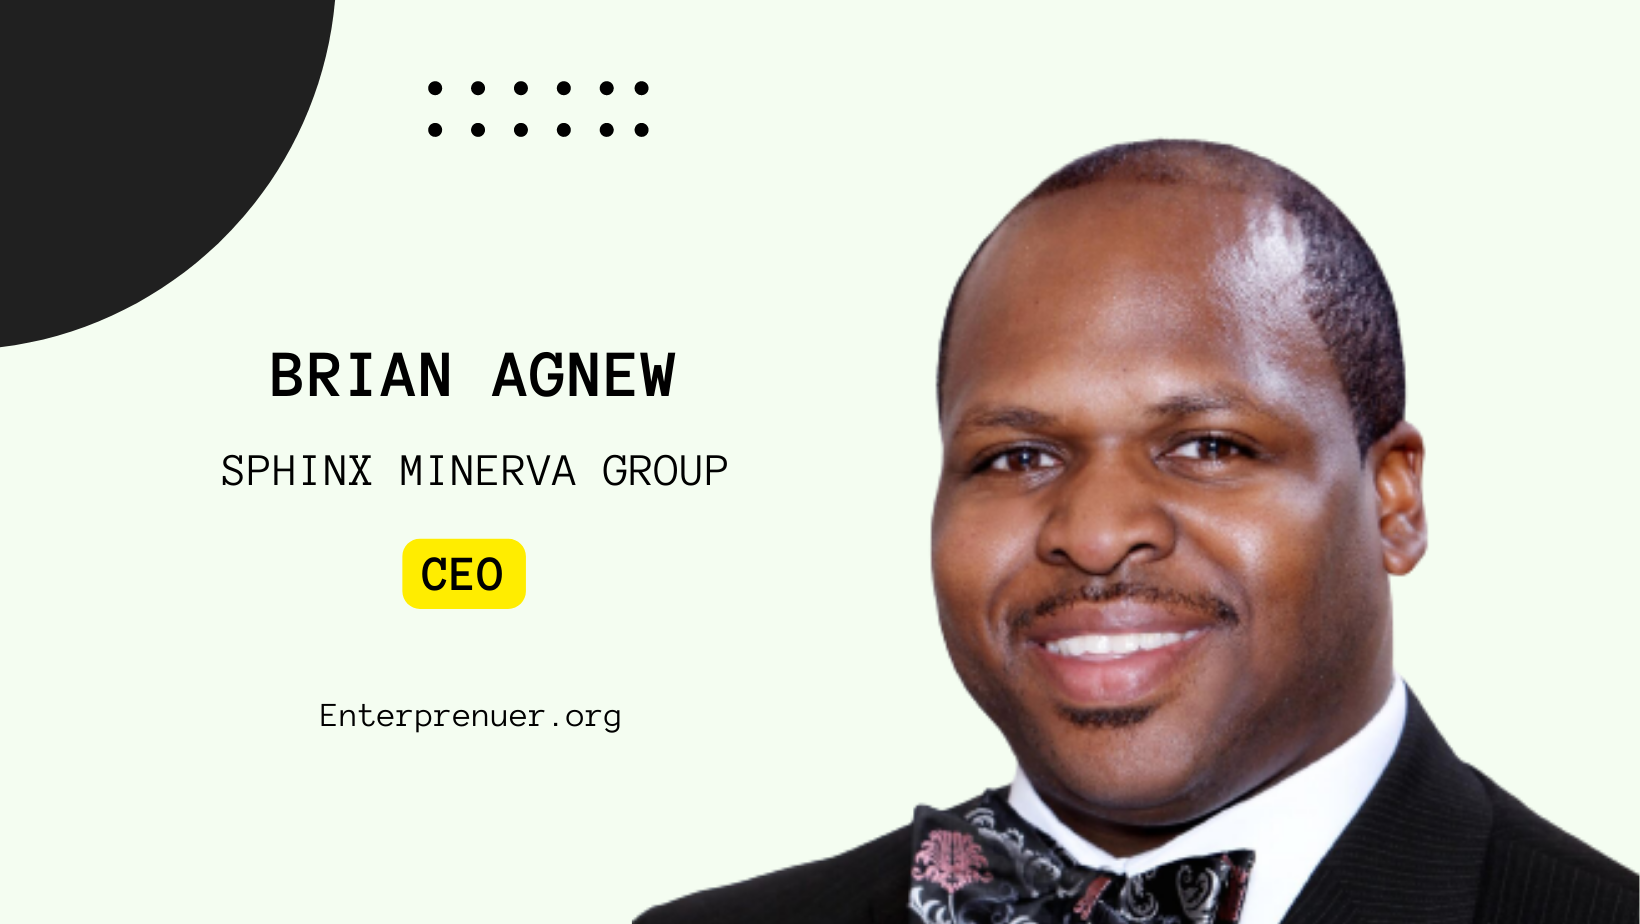 Brian Agnew, CEO of Sphinx Minerva Group